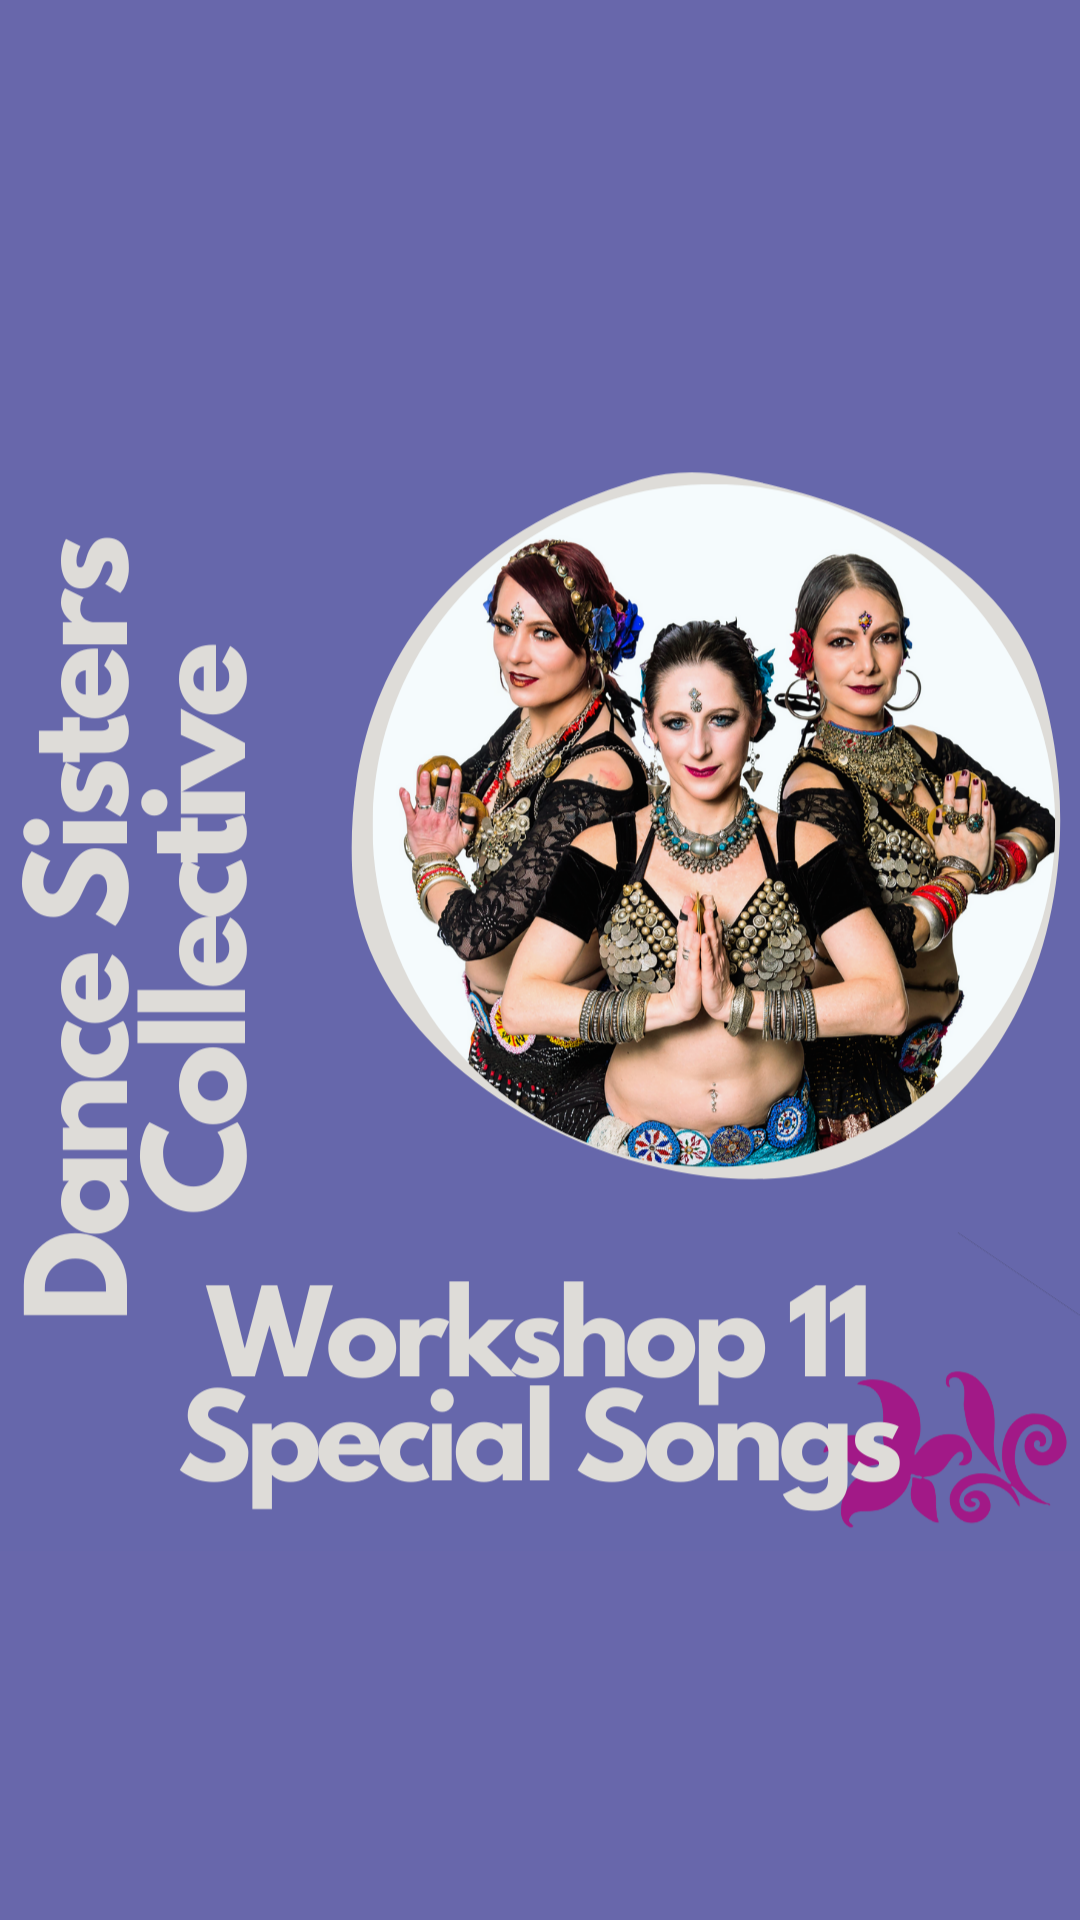 WS11 Special songs w/ the Dance Sisters Collective